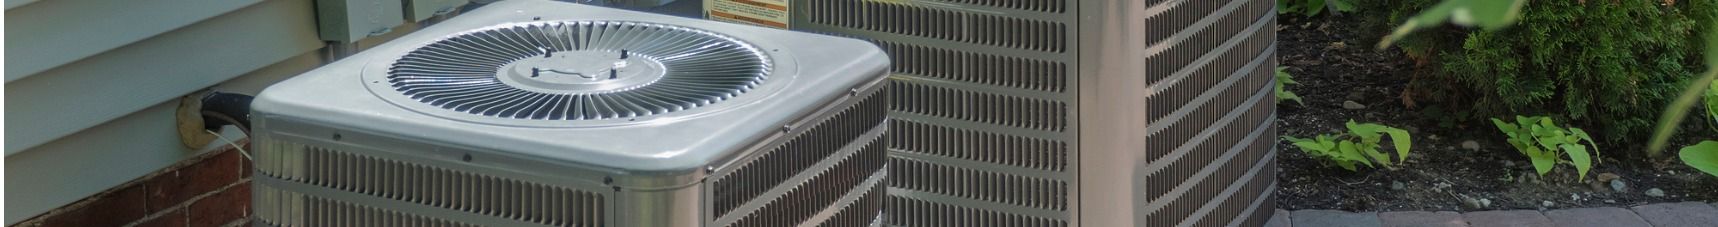 AC unit with a fan on top outside